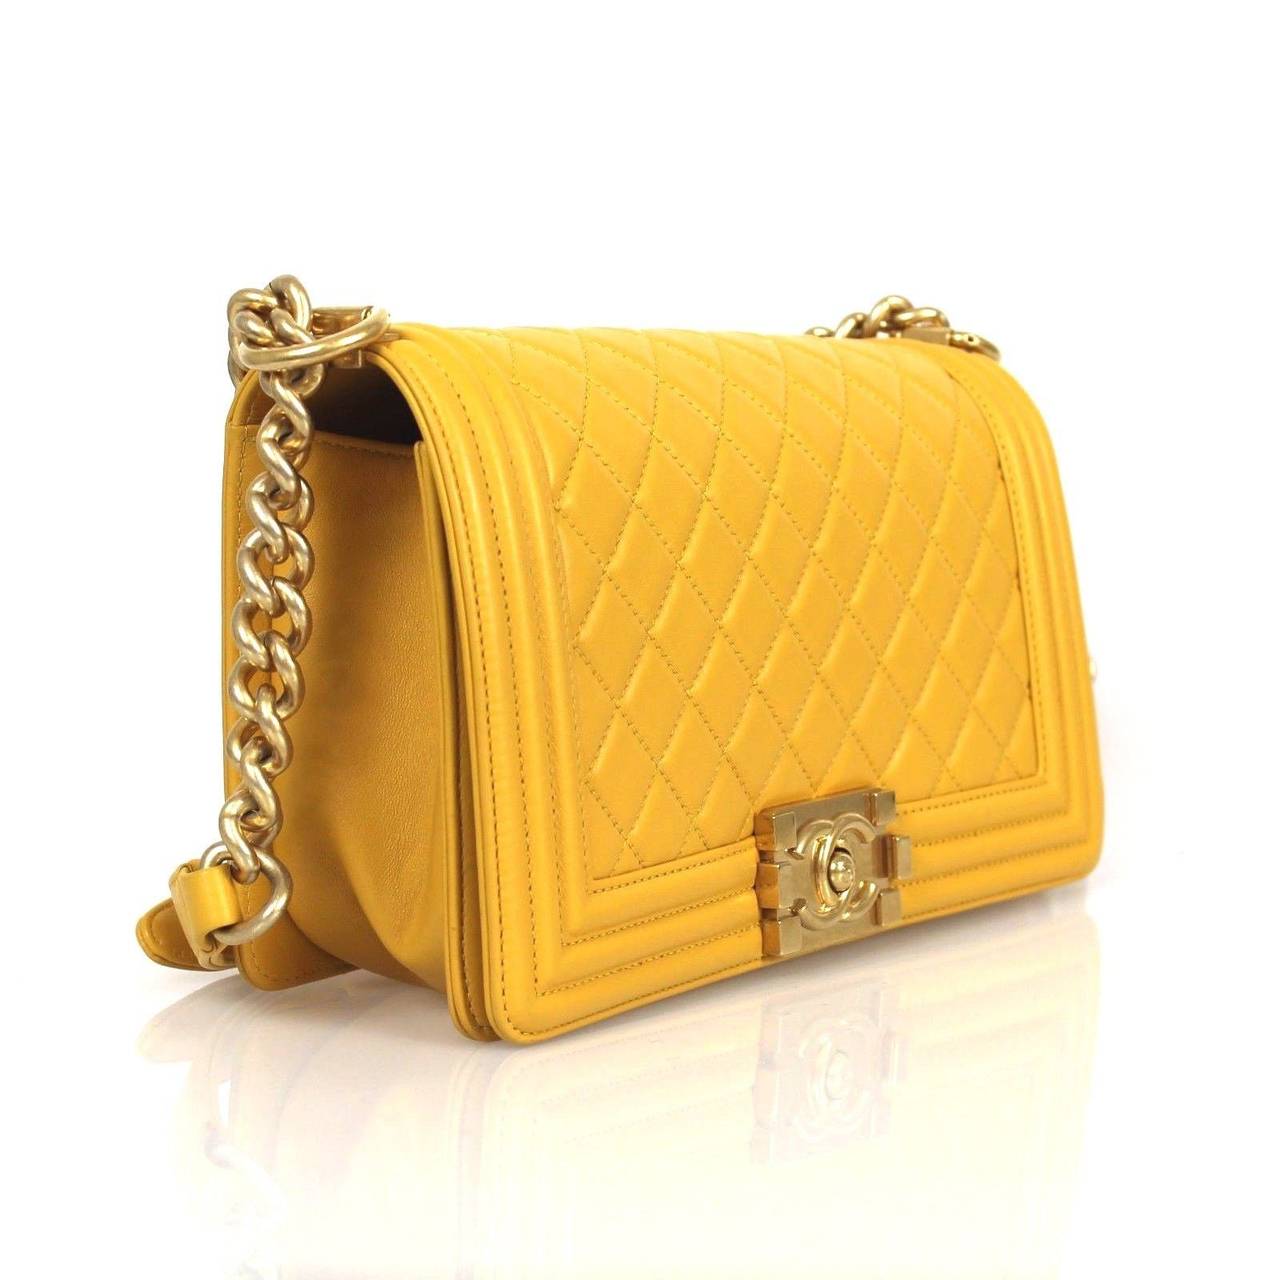 Medium Boy in a exquisite yellow calfskin with gold metal. The bag is of quilted leather trimmed in smooth leather with smooth leather sides and bottom; it has a full front flap with Boy Chanel signature CC push lock closure and gold chain link and